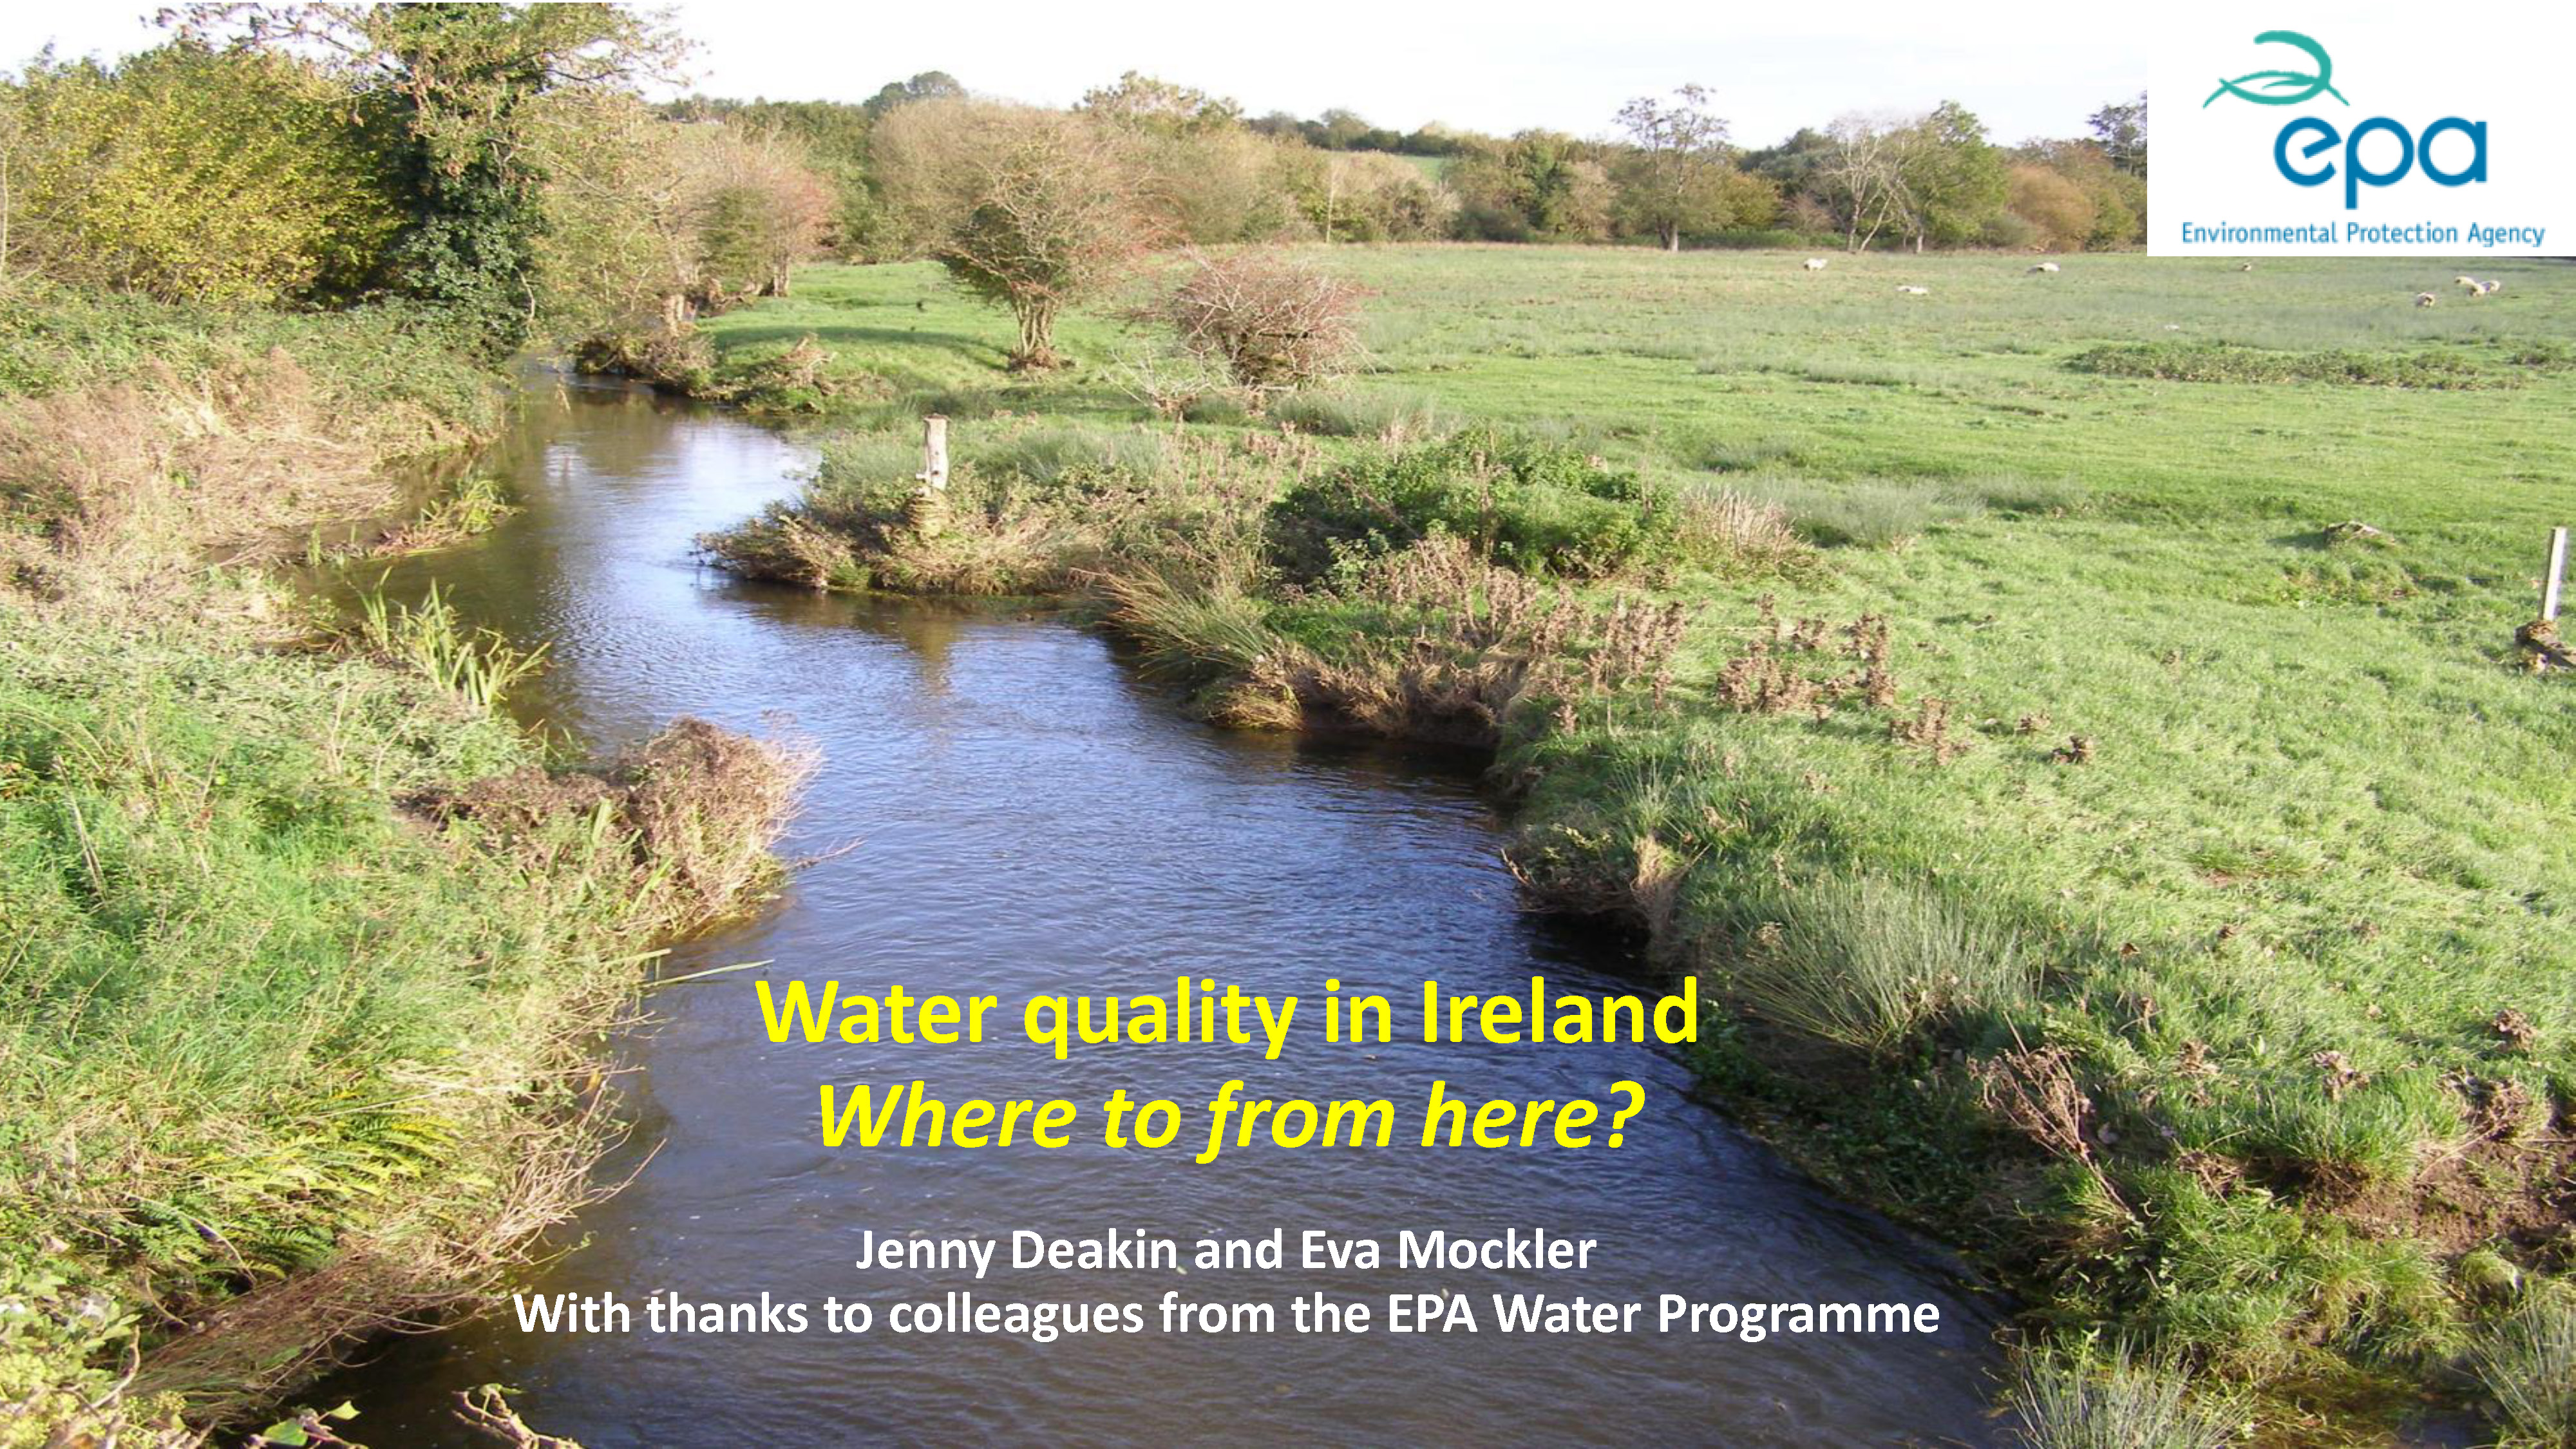 First slide of the presntation 'Water Quality in Ireland: where to from here? It has the title over a picture of a small river in an agricultural landscape.